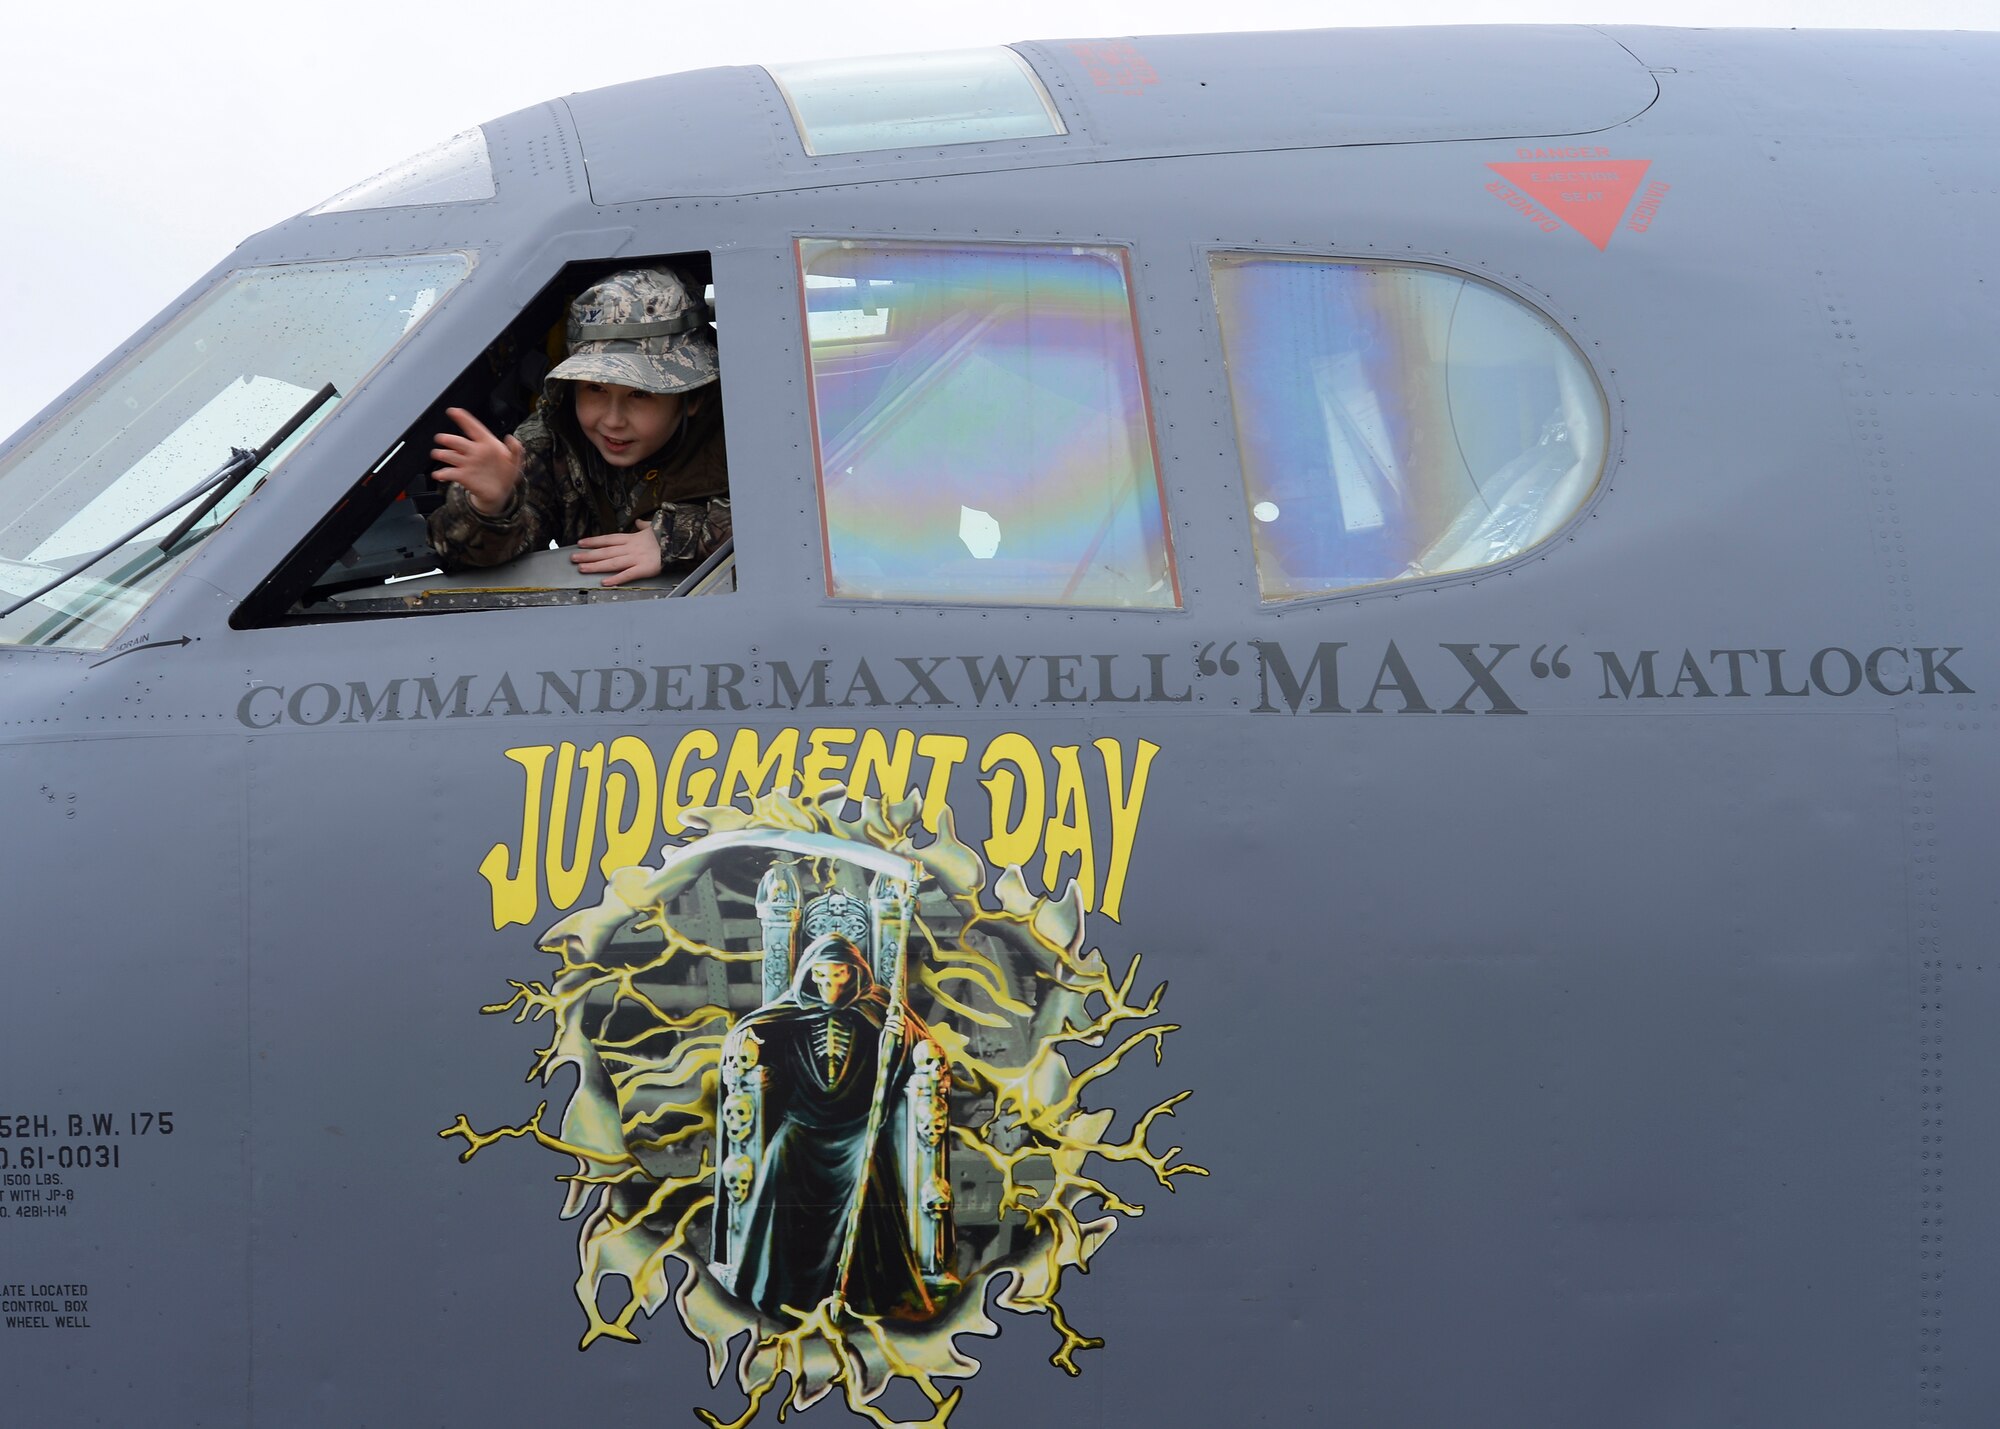 Maxwell Matlock, 10, waves from the cockpit of a B-52H Stratofortress on Barksdale Air Force Base, La., Dec. 18, 2014. Matlock was honored by having his name on a B-52 as part of a presentation for becoming an Honorary Crew Chief. (U.S. Air Force photo/Senior Airman Joseph A. Pagán Jr.)